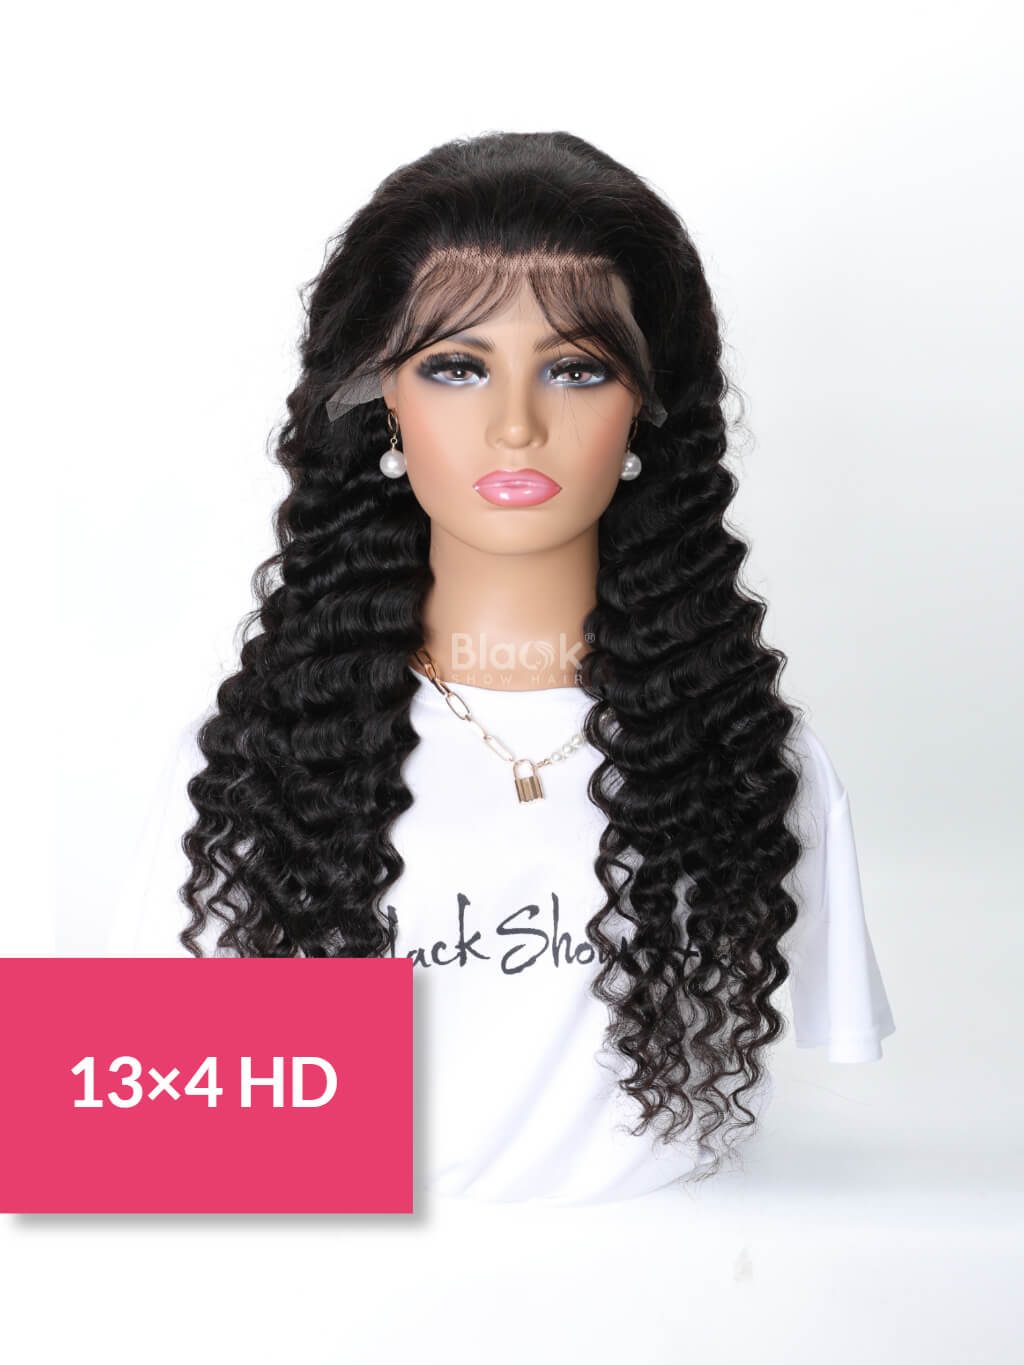 13x4 hd lace rontal wig deep wave